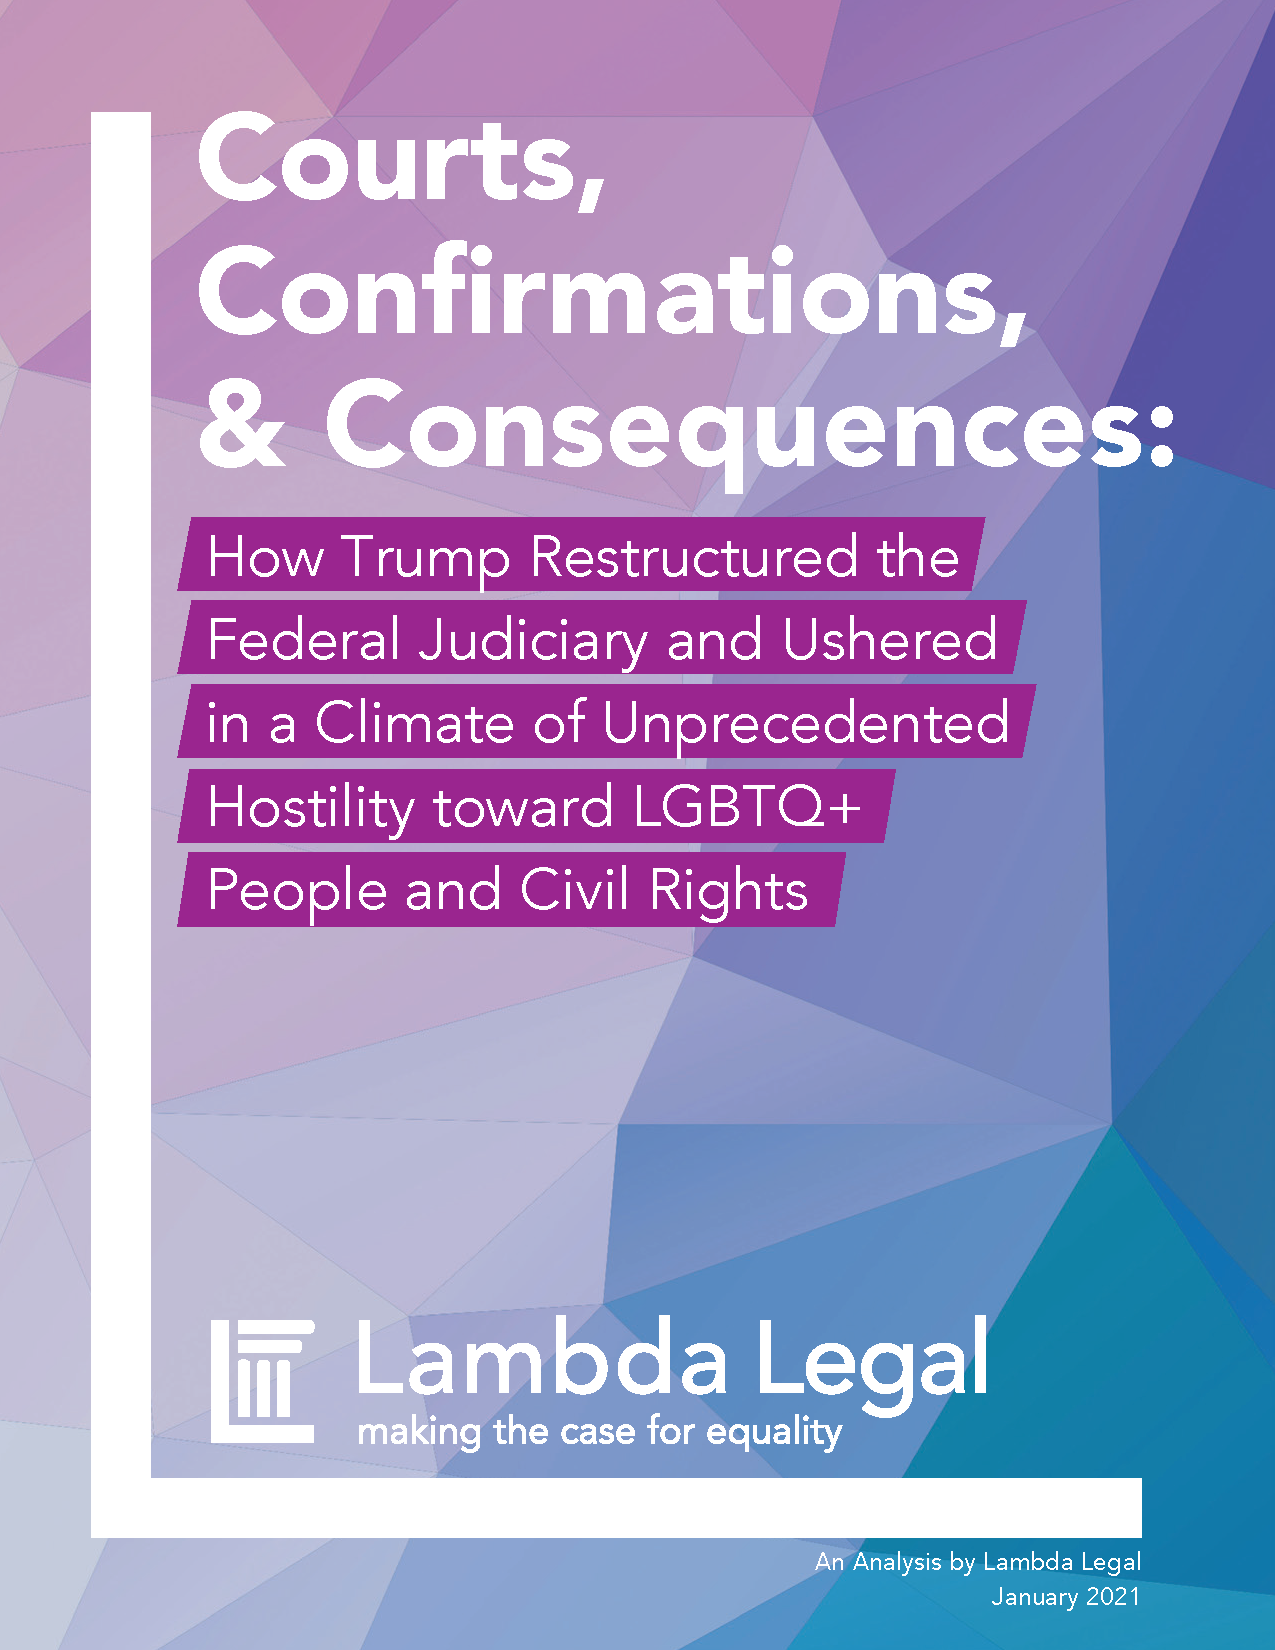 Courts, Confirmations & Consequences 